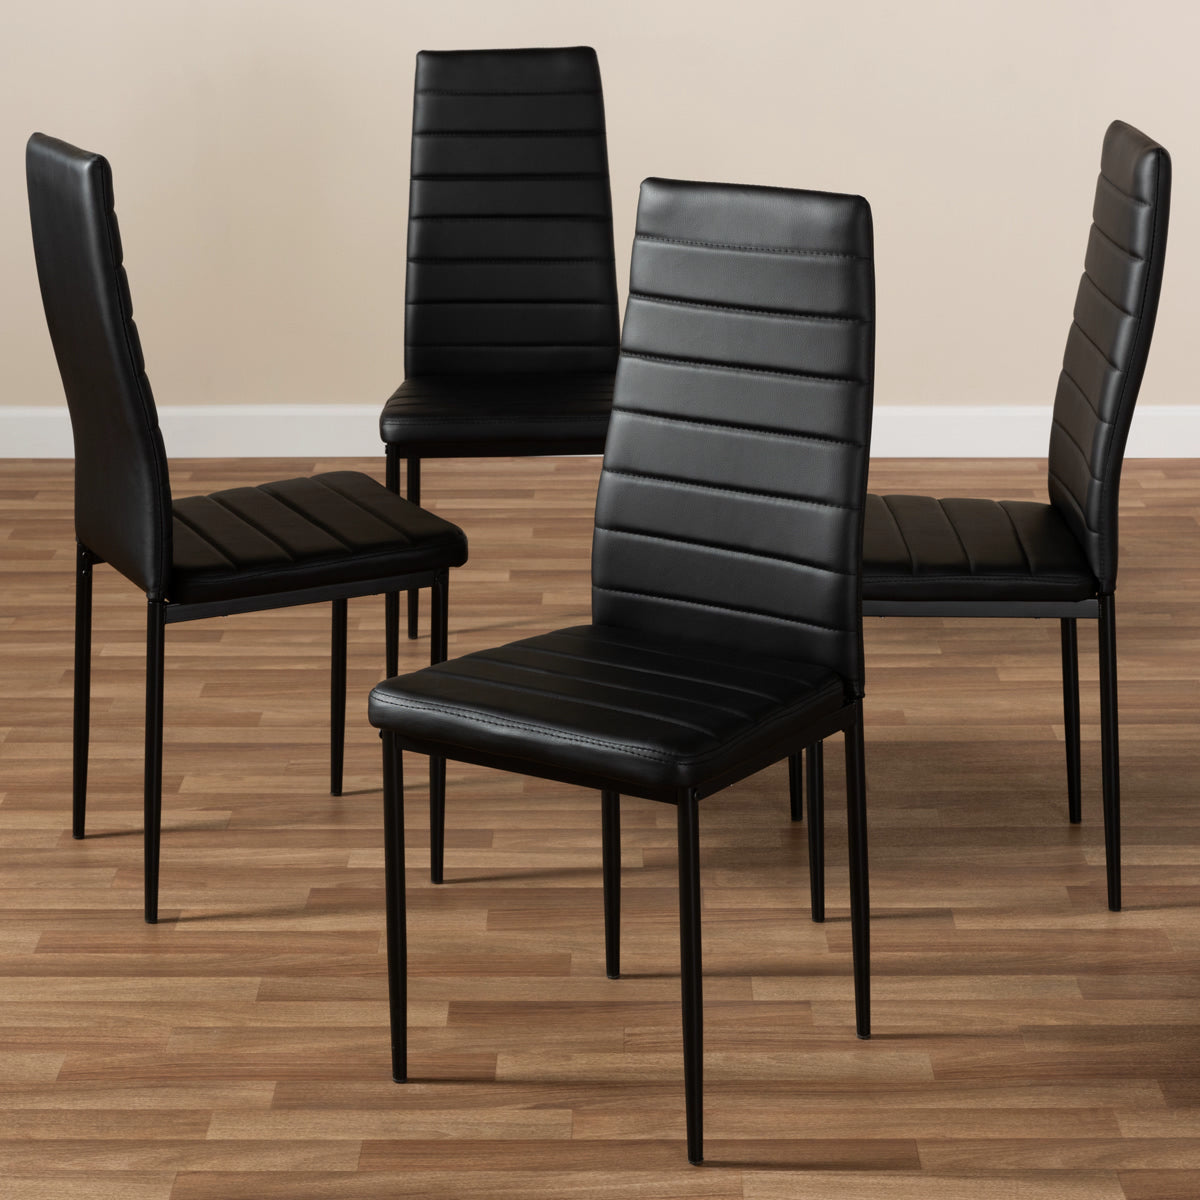 Baxton Studio Armand Modern and Contemporary Black Faux Leather Upholstered Dining Chair (Set of 4) Baxton Studio-dining chair-Minimal And Modern - 4